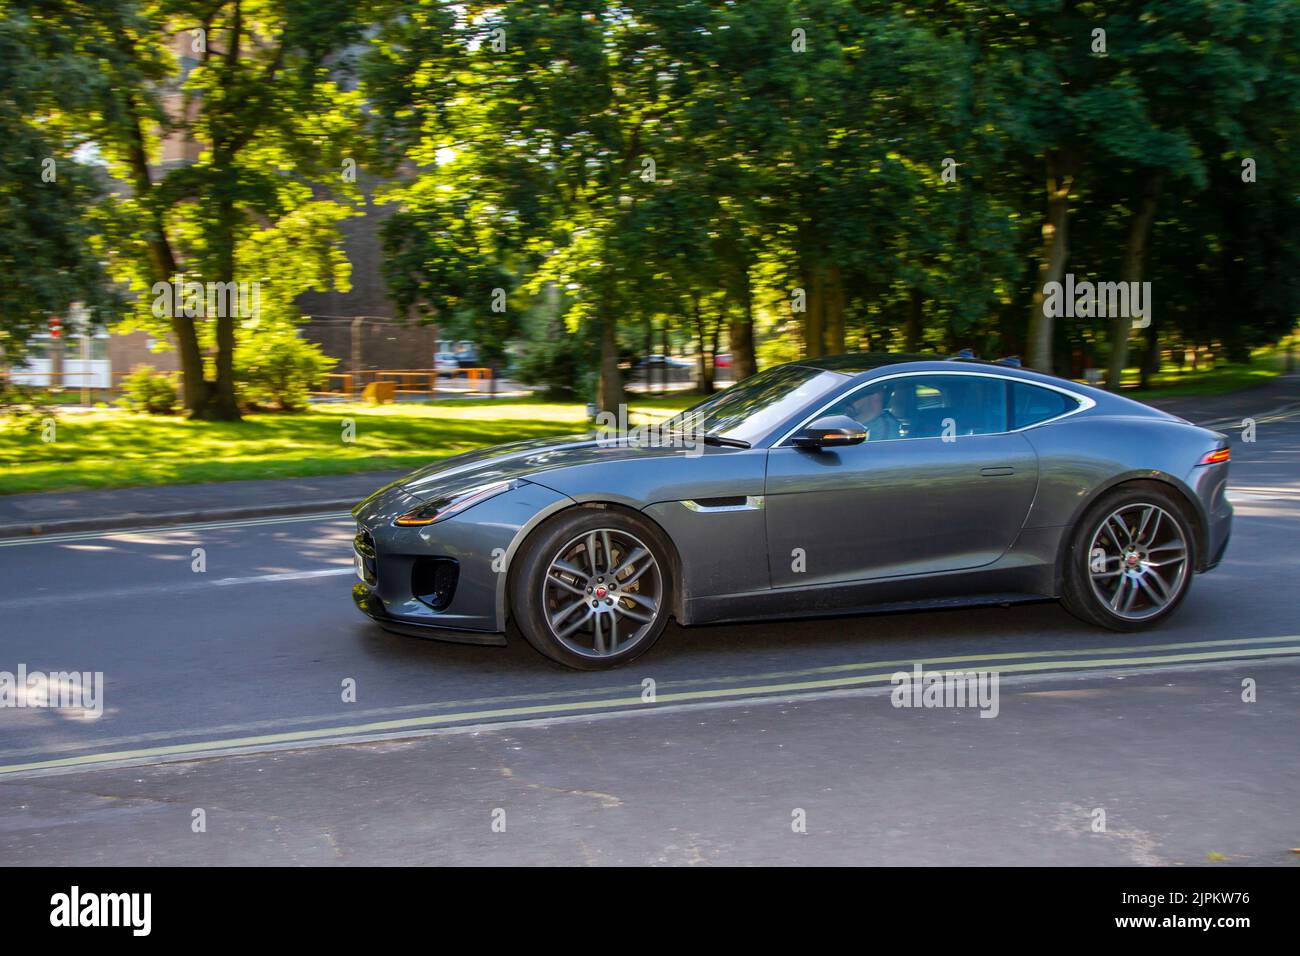 2017 grey British Jaguar F-TYPE V6 2995cc 8 speed manual roadster; Cars on display at the 13th Lytham Hall Summer Classic Car & Motorcycle Show, a Classic Vintage Collectible Transport Festival. ; Stock Photo